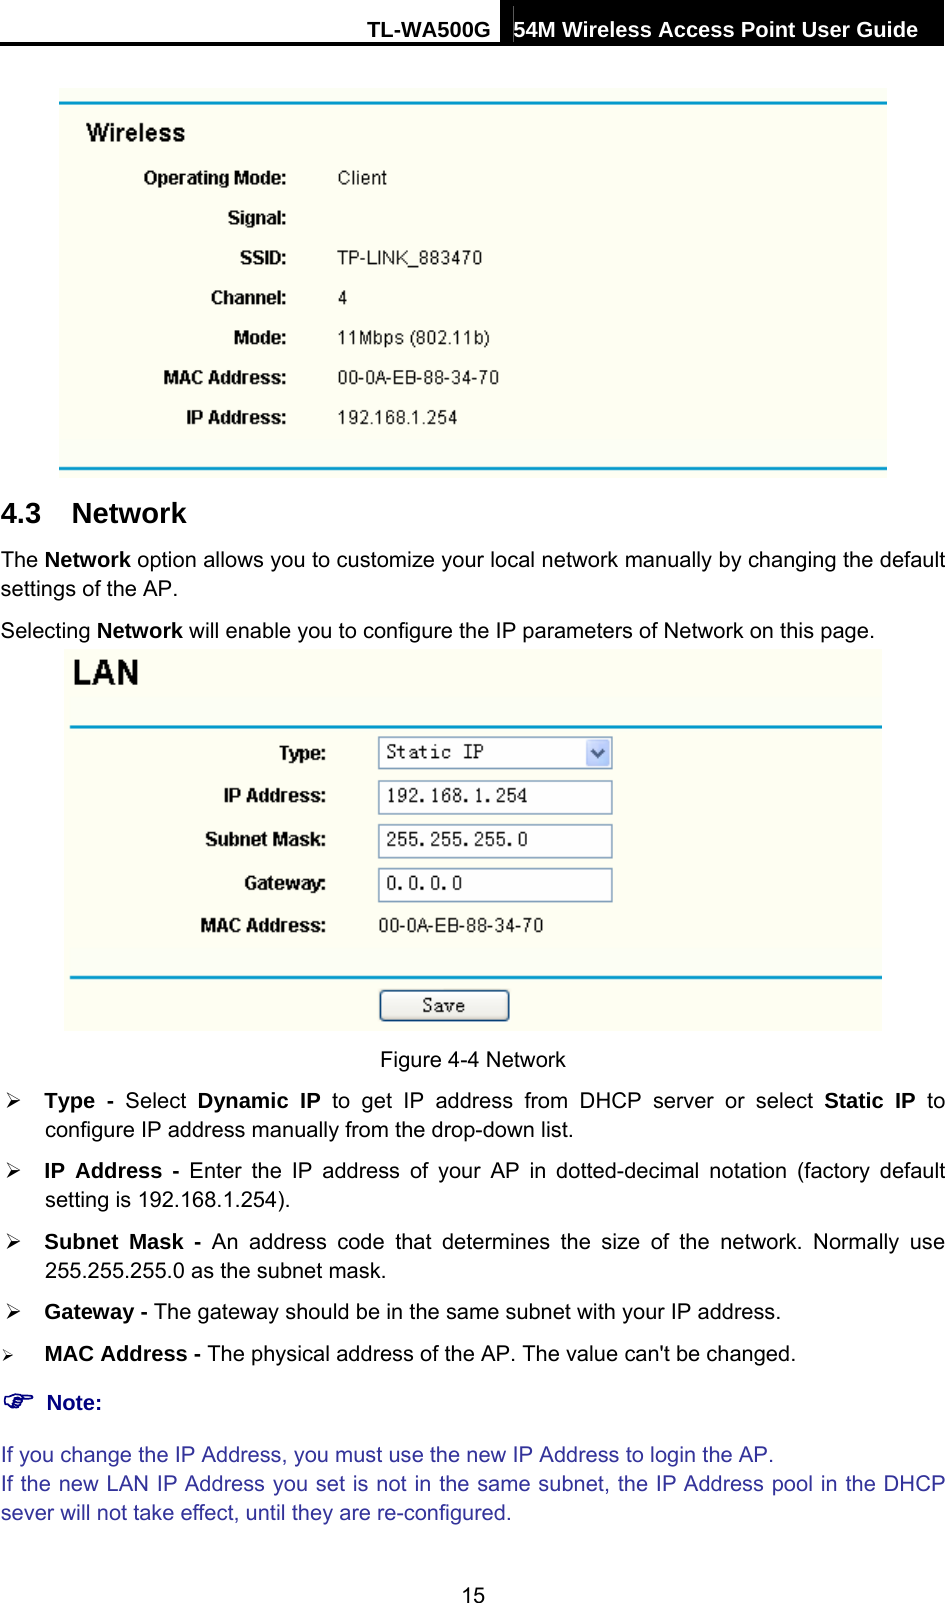 TL-WA500G 54M Wireless Access Point User Guide   4.3  Network The Network option allows you to customize your local network manually by changing the default settings of the AP. Selecting Network will enable you to configure the IP parameters of Network on this page.  Figure 4-4 Network ¾ Type - Select Dynamic IP to get IP address from DHCP server or select Static IP to configure IP address manually from the drop-down list. ¾ IP Address - Enter the IP address of your AP in dotted-decimal notation (factory default setting is 192.168.1.254). ¾ Subnet Mask - An address code that determines the size of the network. Normally use 255.255.255.0 as the subnet mask.   ¾ Gateway - The gateway should be in the same subnet with your IP address.   ¾ MAC Address - The physical address of the AP. The value can&apos;t be changed. ) Note: If you change the IP Address, you must use the new IP Address to login the AP. If the new LAN IP Address you set is not in the same subnet, the IP Address pool in the DHCP sever will not take effect, until they are re-configured. 15 